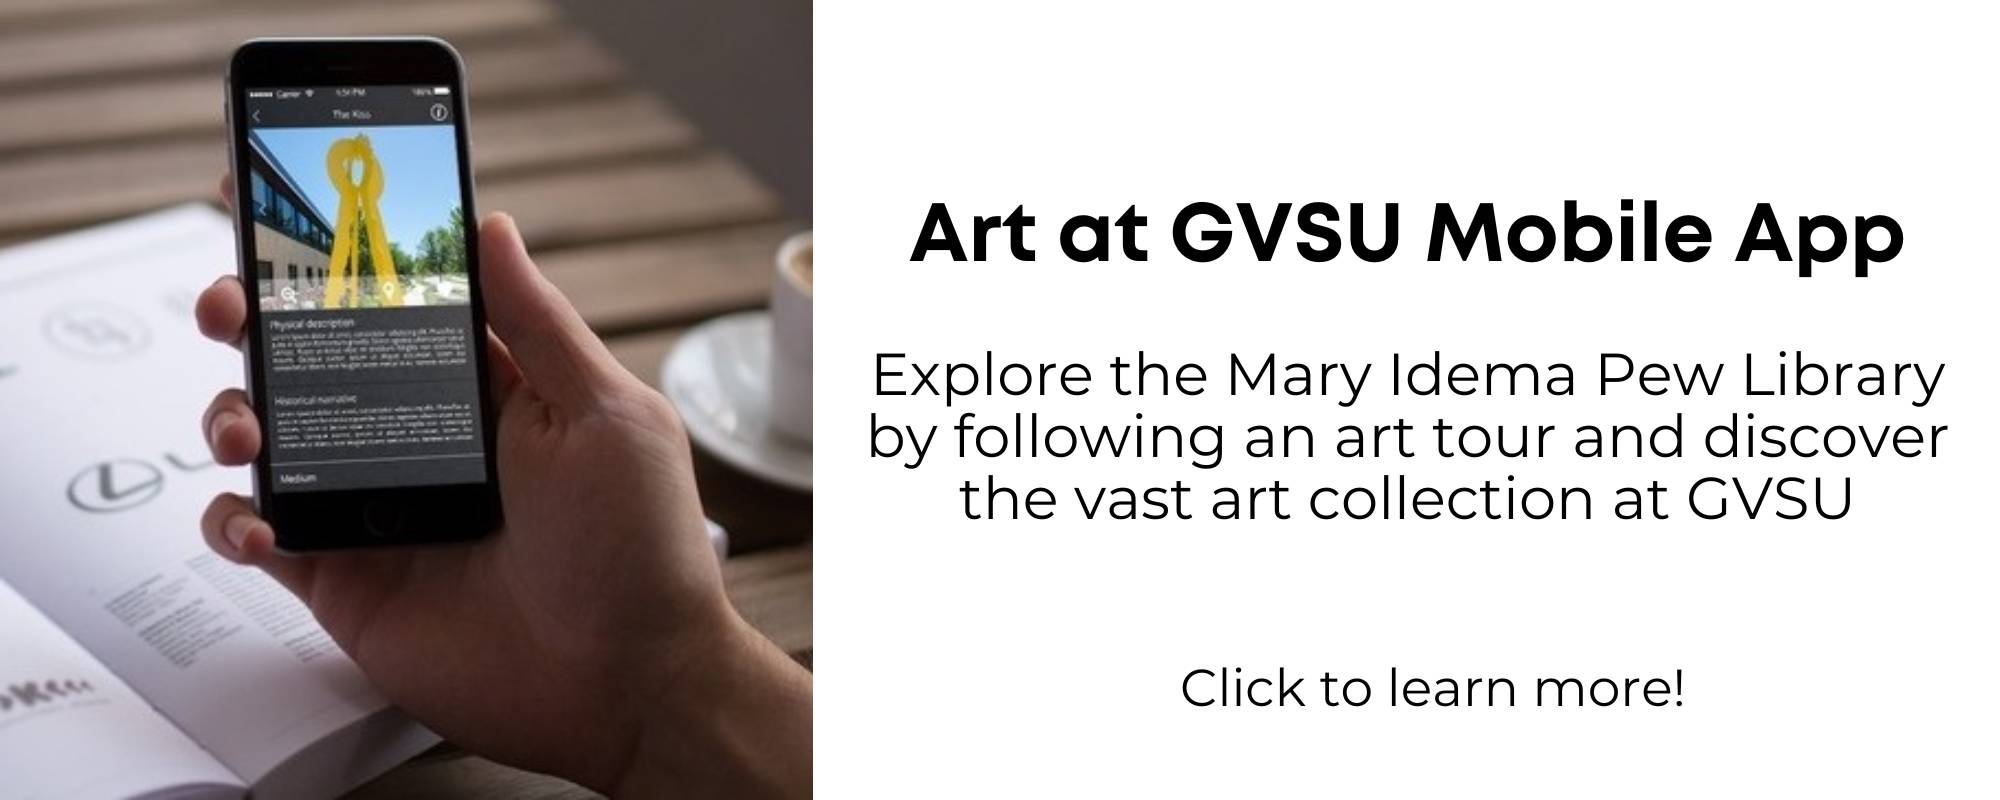 Click to learn more about the GVSU App to take a virtual tour of some of the artwork in the Mary Idema Pew Library